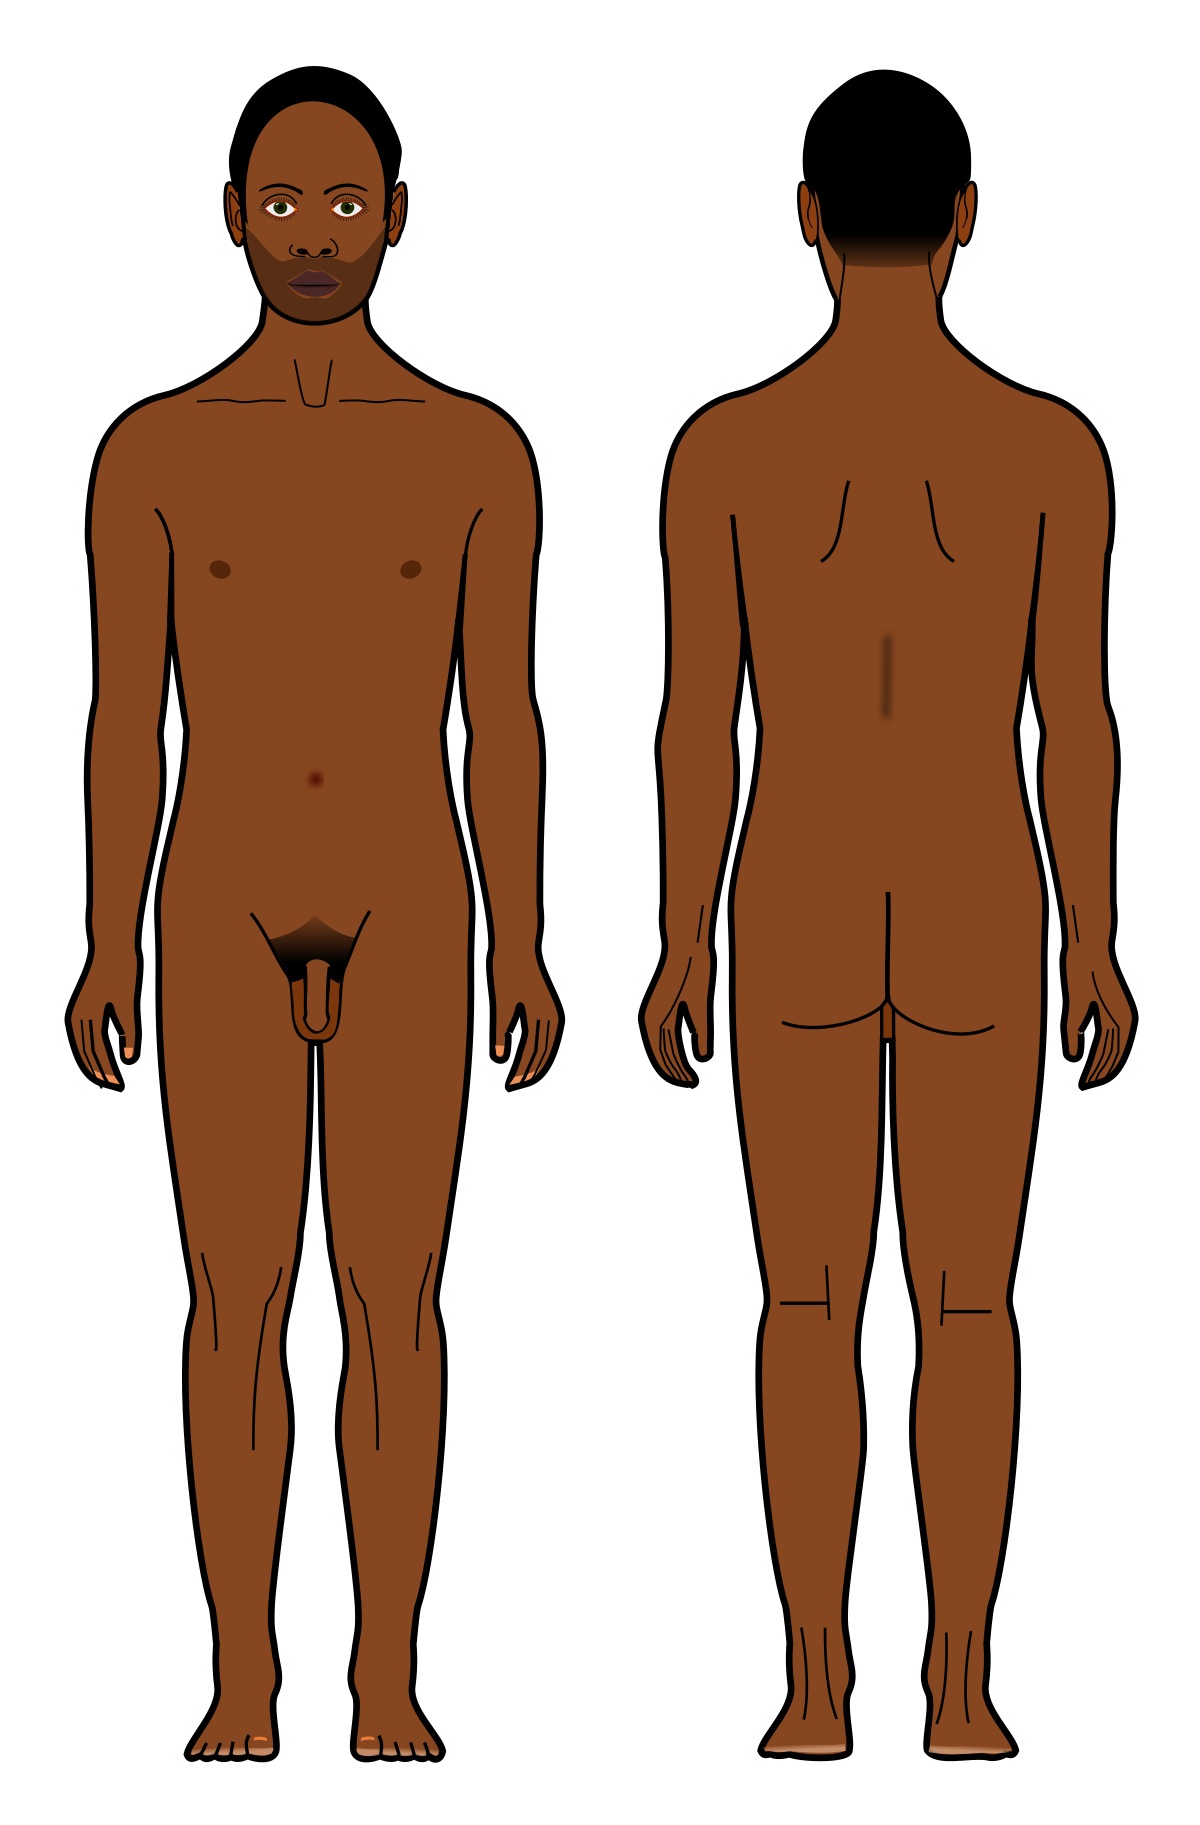 File:Black man surface diagram ahead-behind.svg - Wikimedia Commons.